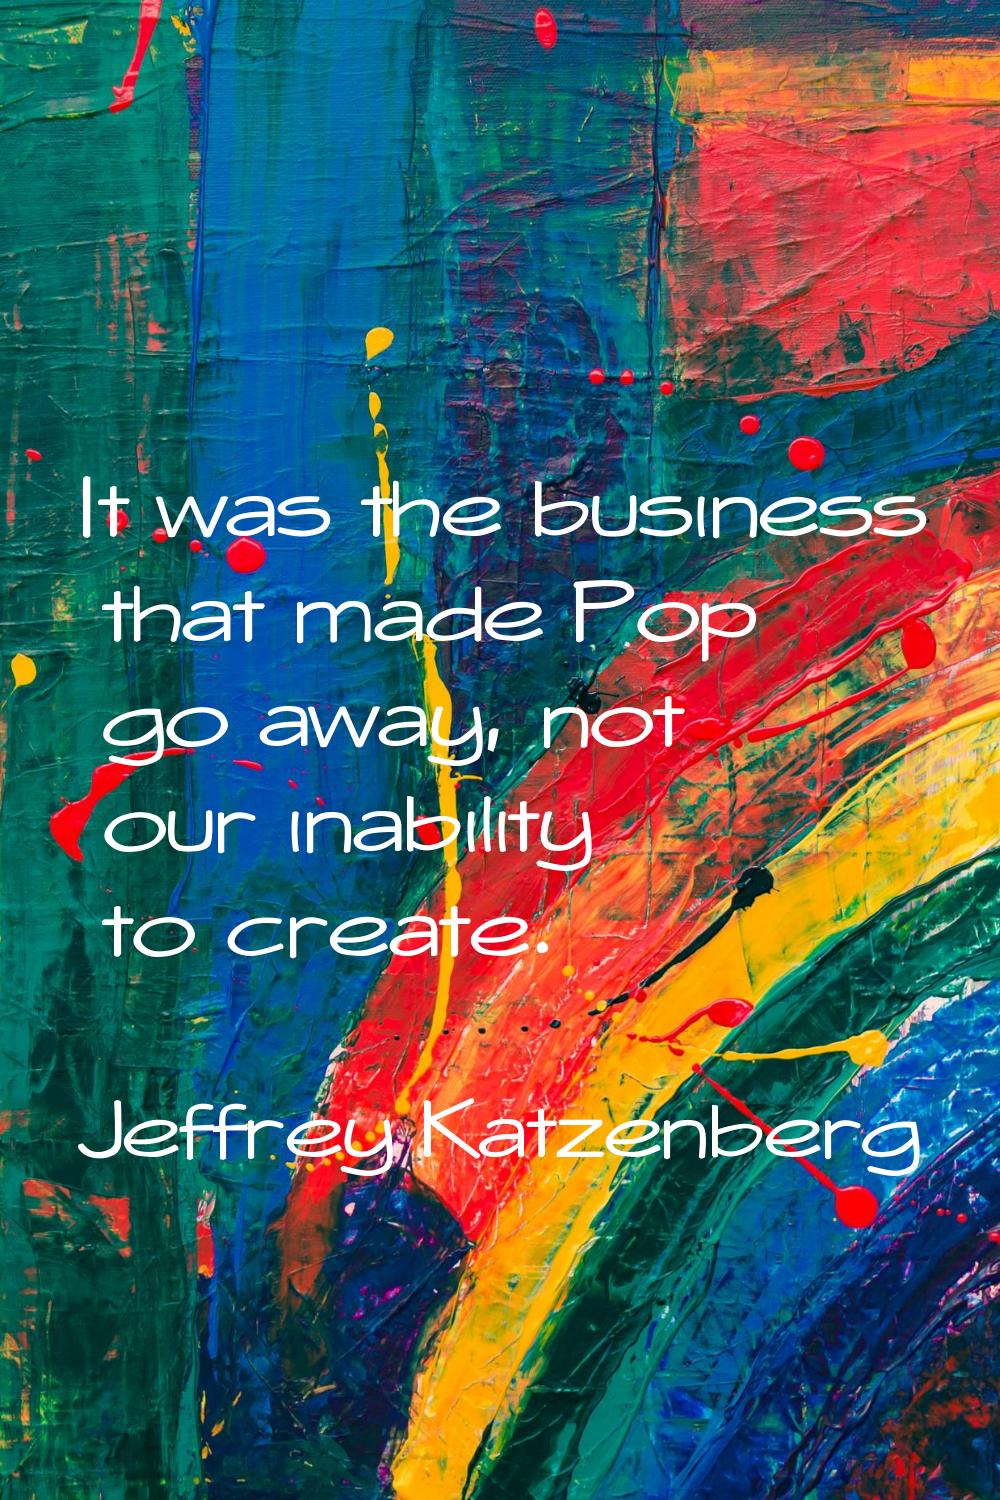 It was the business that made Pop go away, not our inability to create.